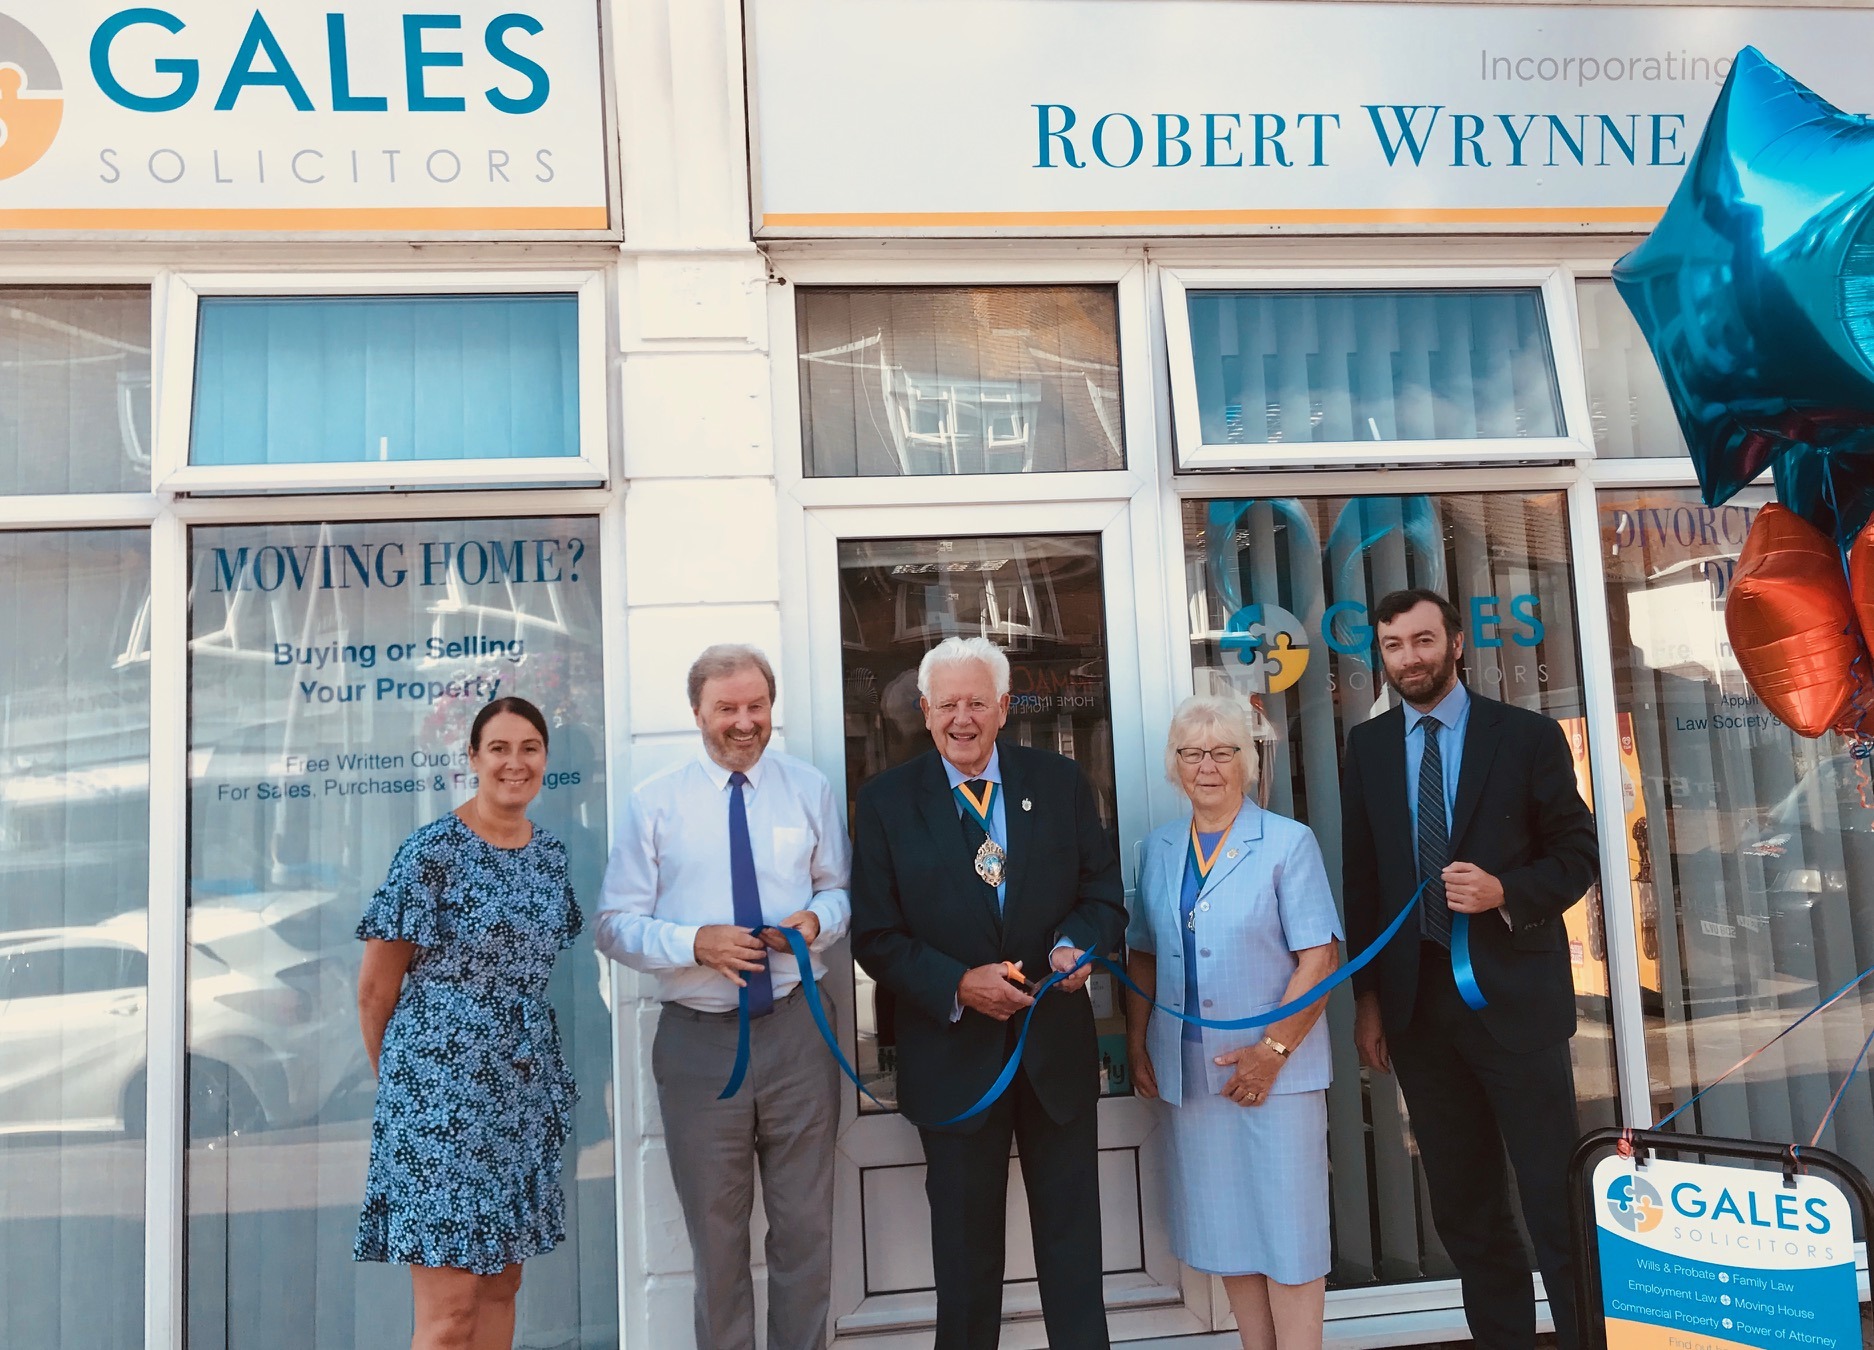 Gales Solicitors merges with Robert Wrynne Solicitors in Tuckton